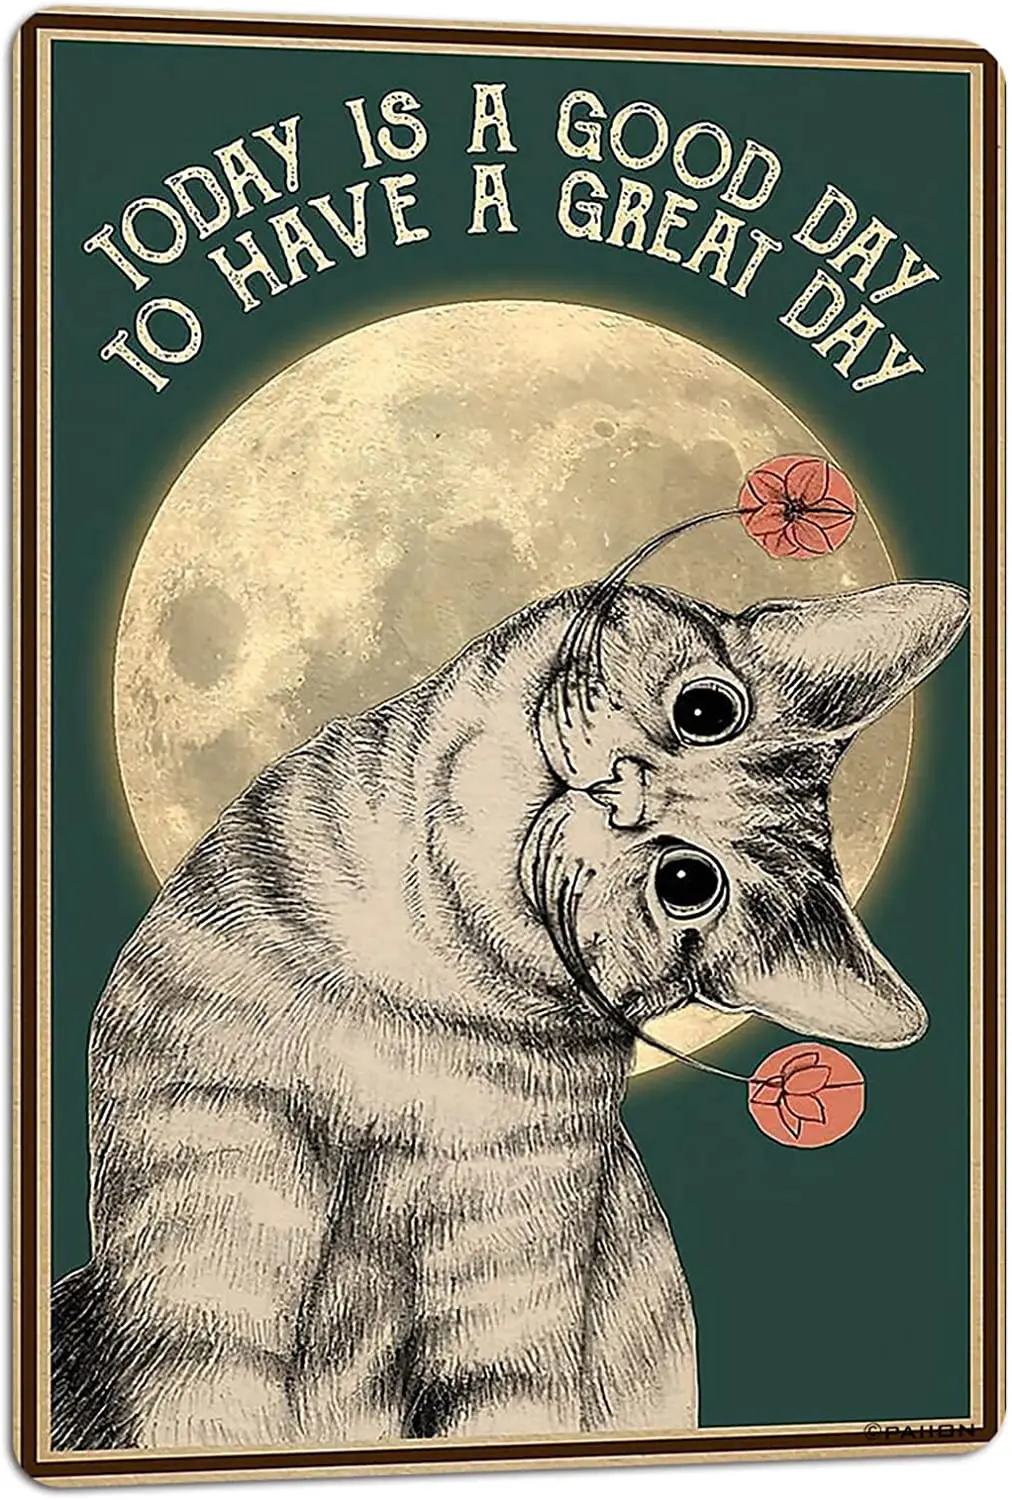 

PAIION Cat Vintage Metal Tin Signs,Inspirational Retro Home Farmhouse Wall Decor, Today is A Good Day to Have A Great Day Poster